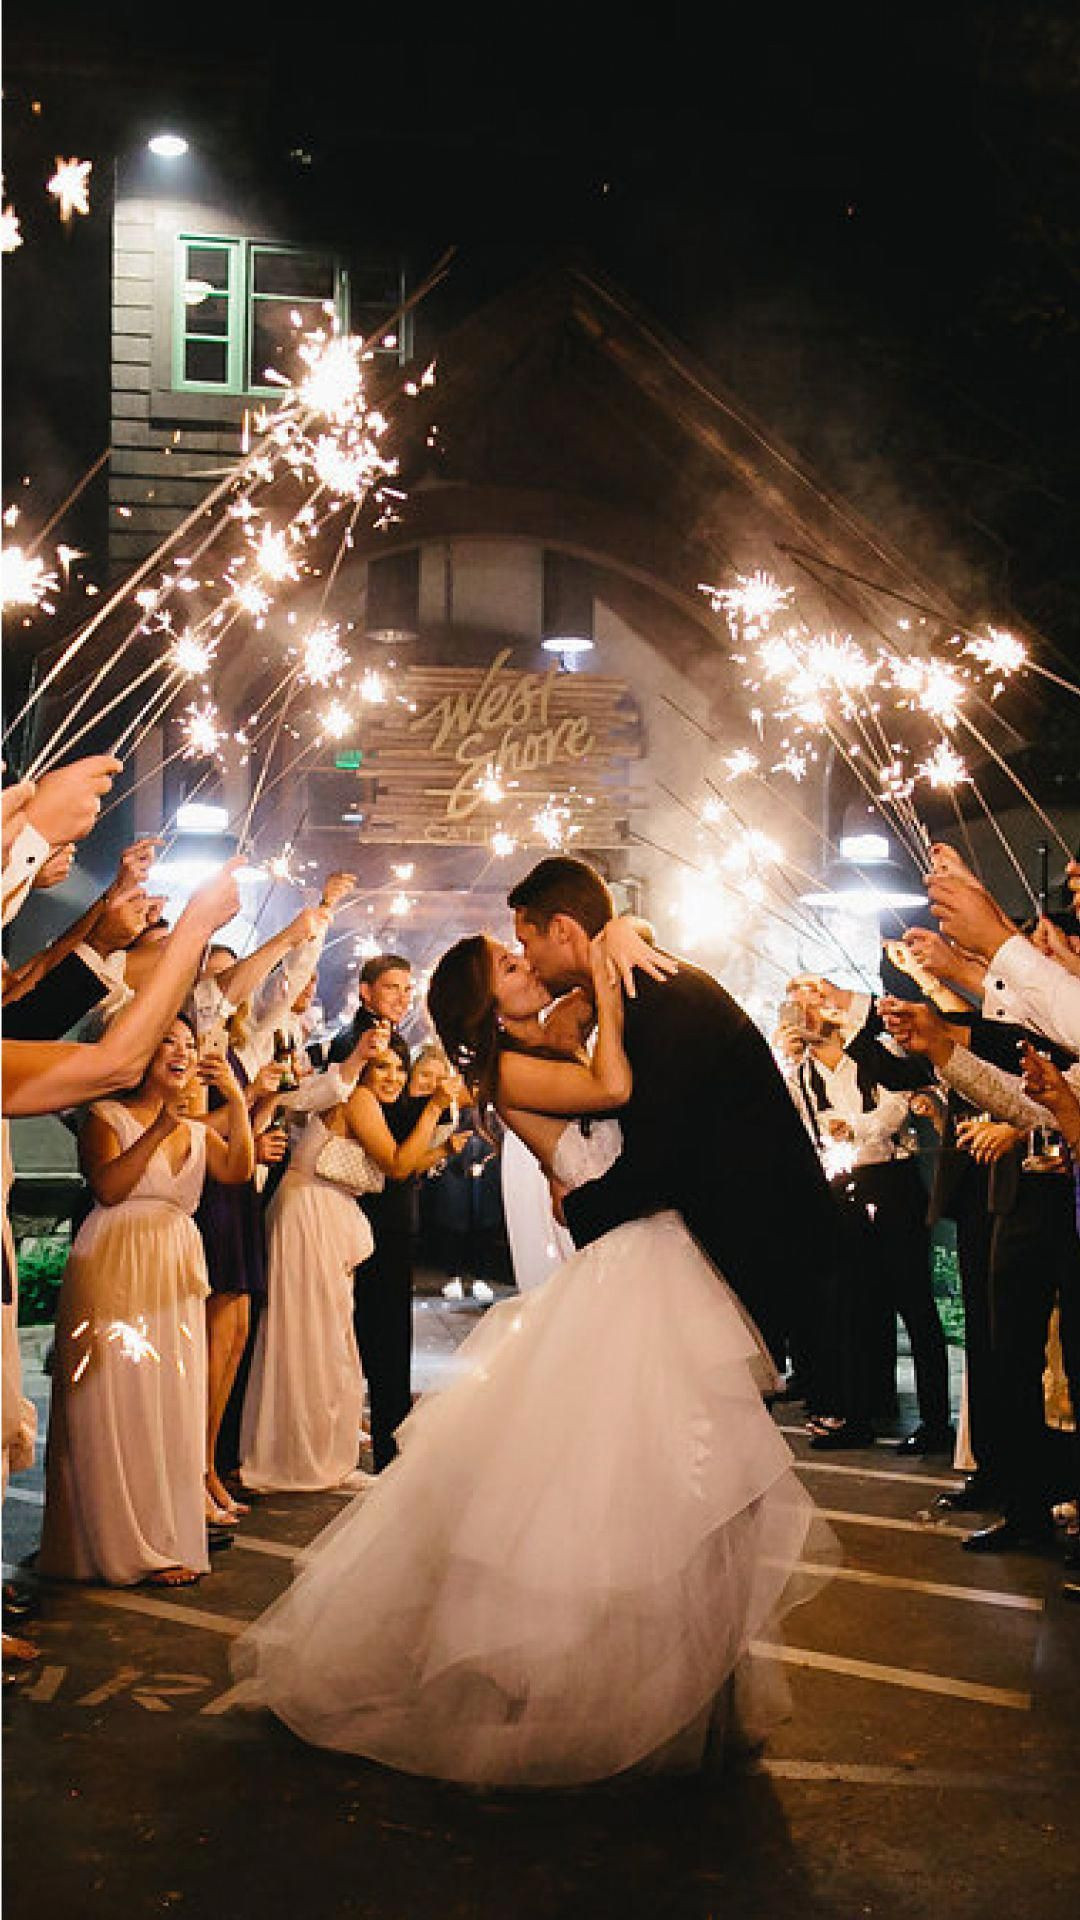 36 Inch Wedding Sparklers Wholesale
 36 Inch Sparklers Smokeless Long Sparklers For Weddings